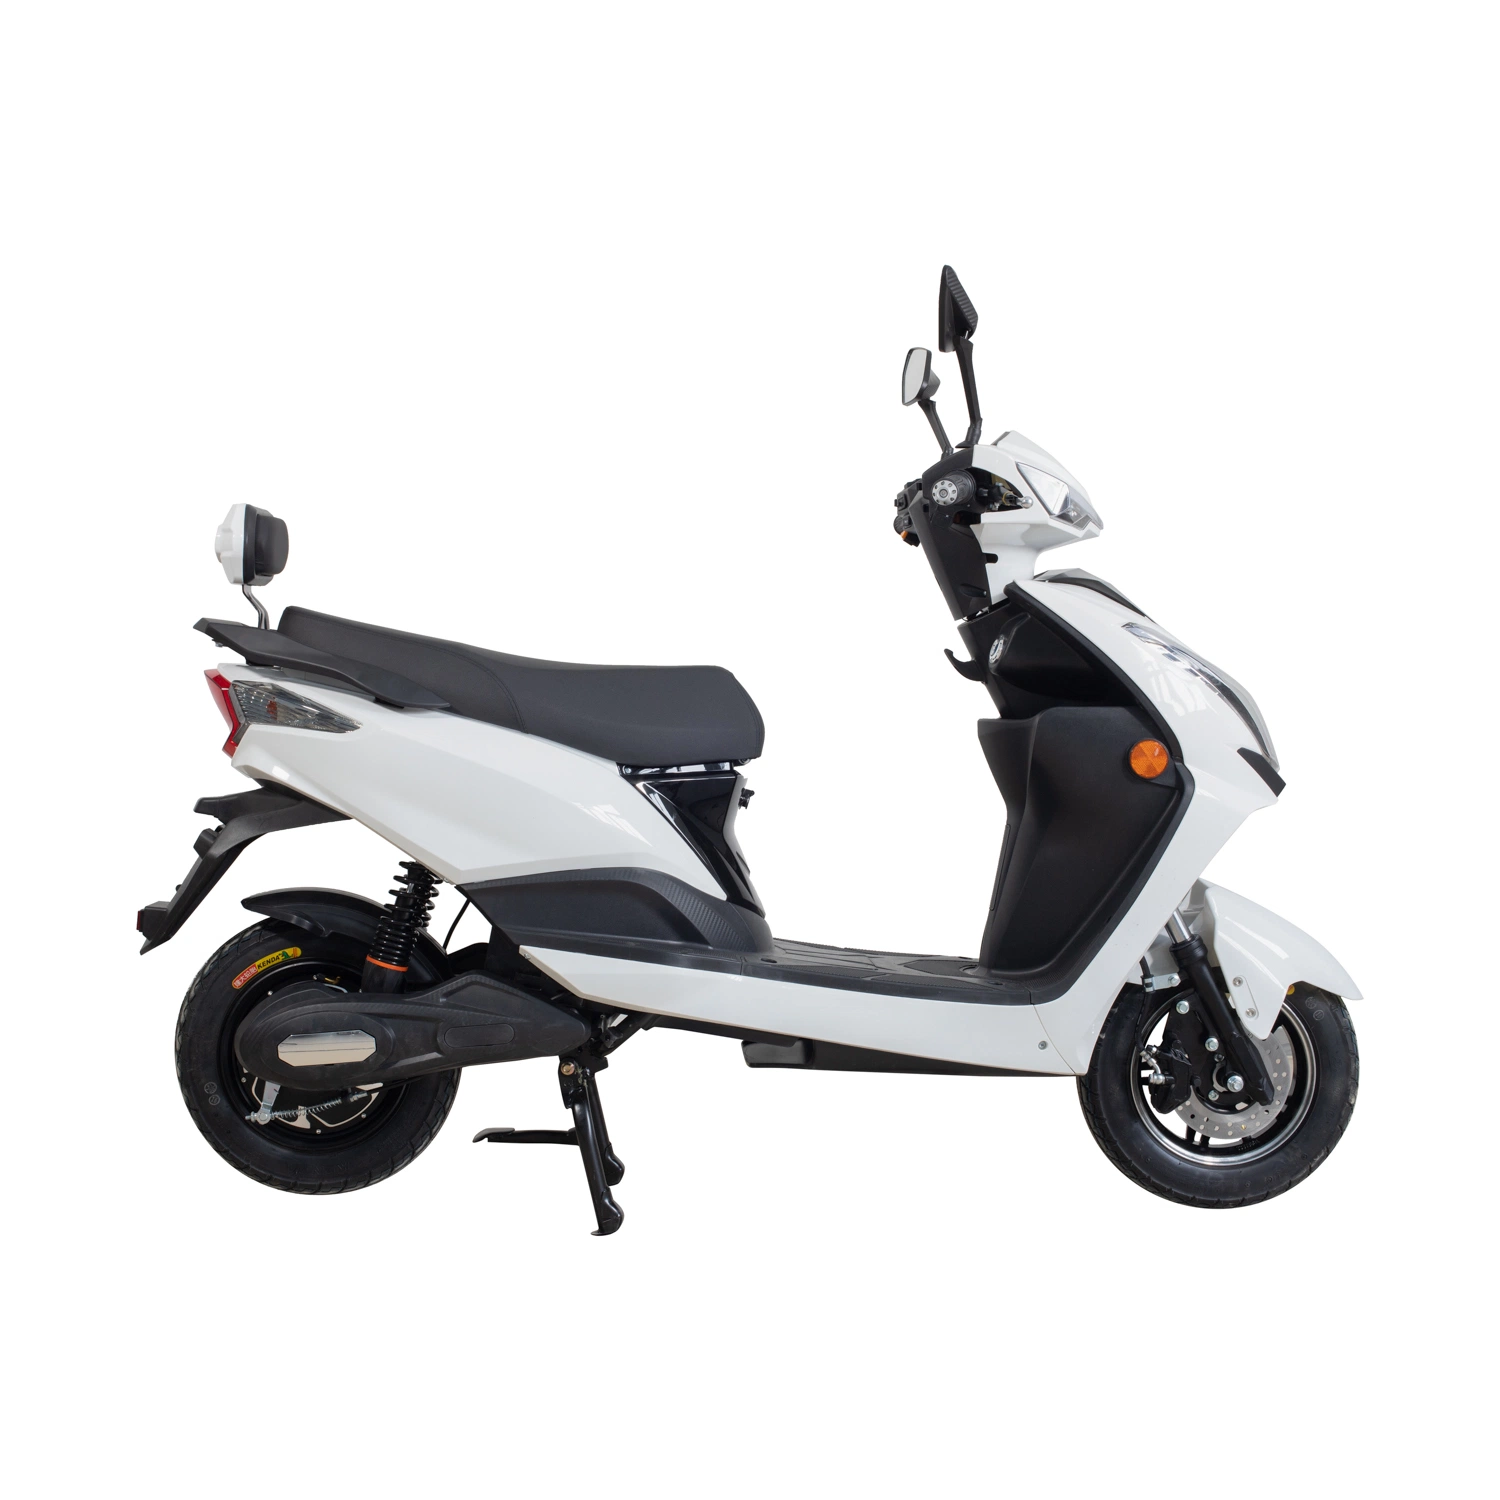 1000W Max OEM Motor Power Battery Time Charging Electric Scooter Motorcycle for Adults High quality/High cost performance CKD